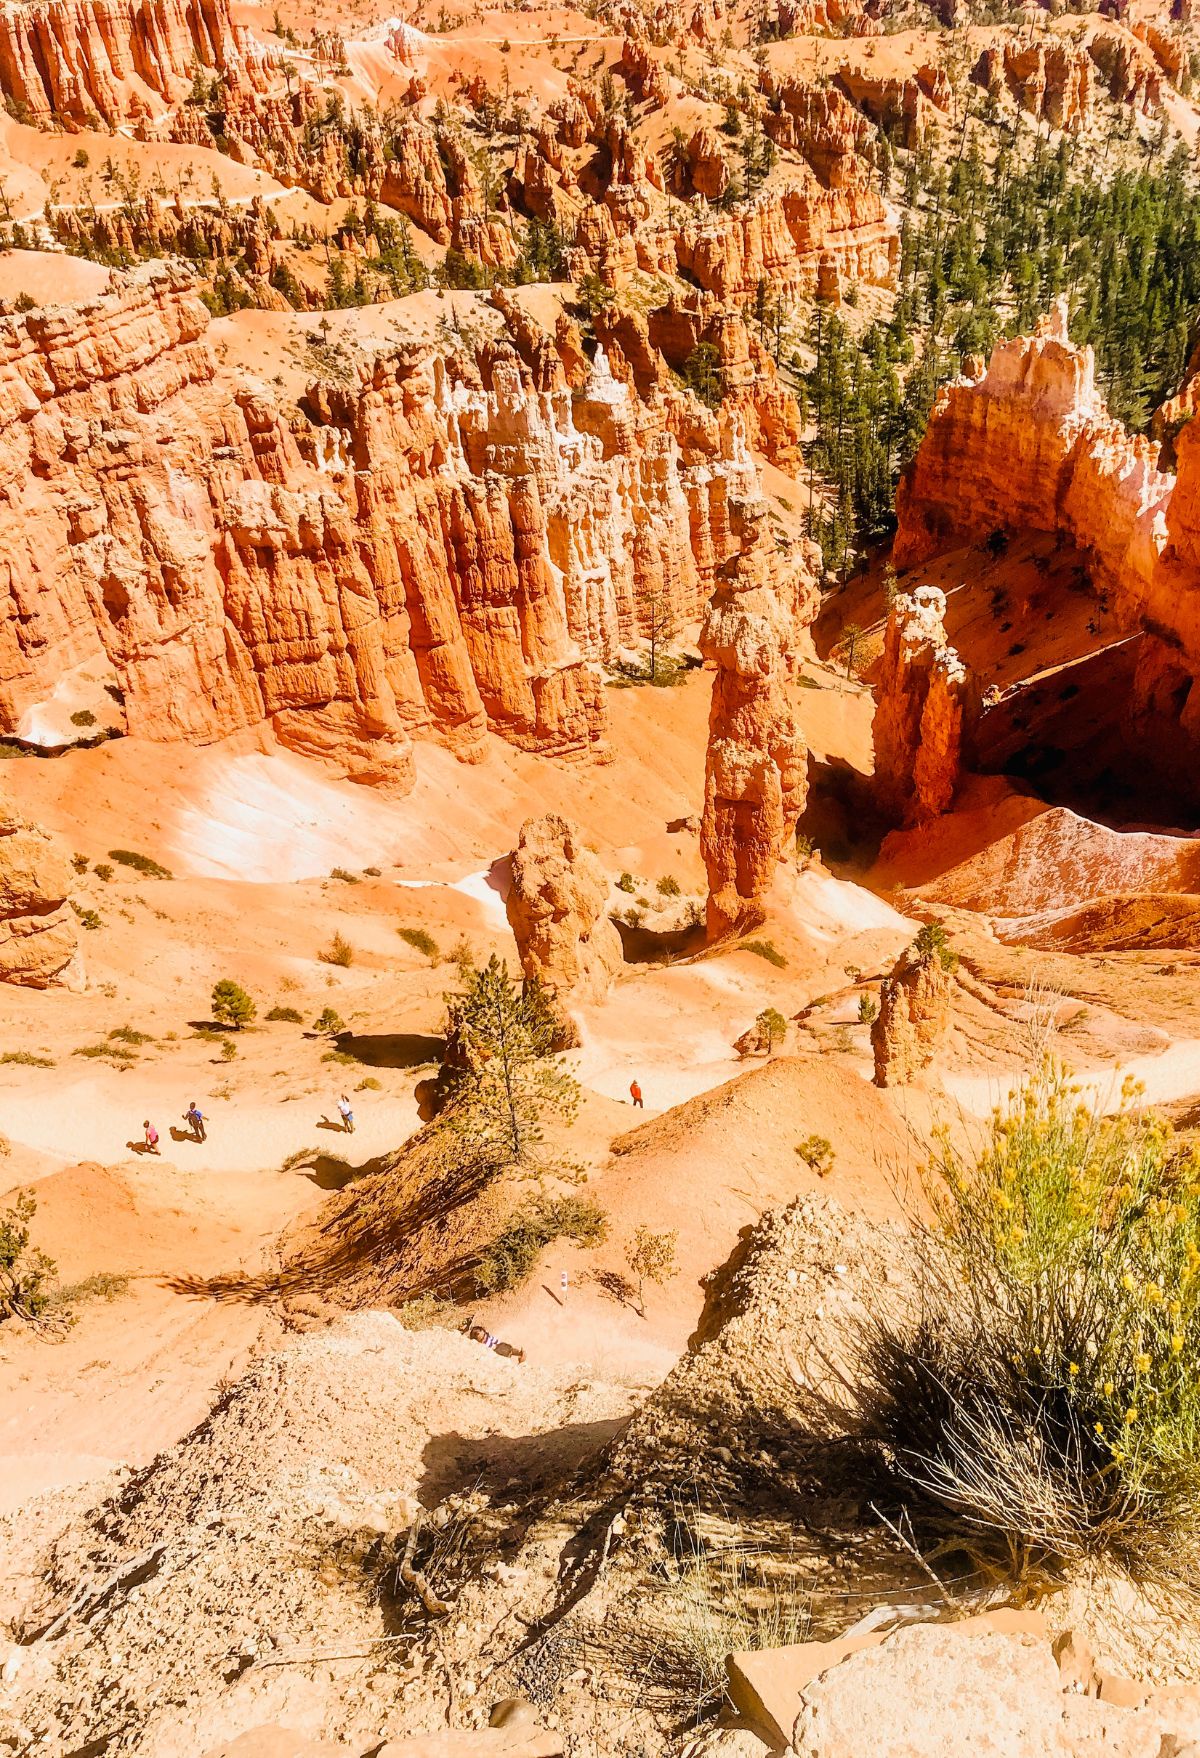 Bryce Canyon National Park in Utah showcases the breathtaking beauty of Bryce Canyon.